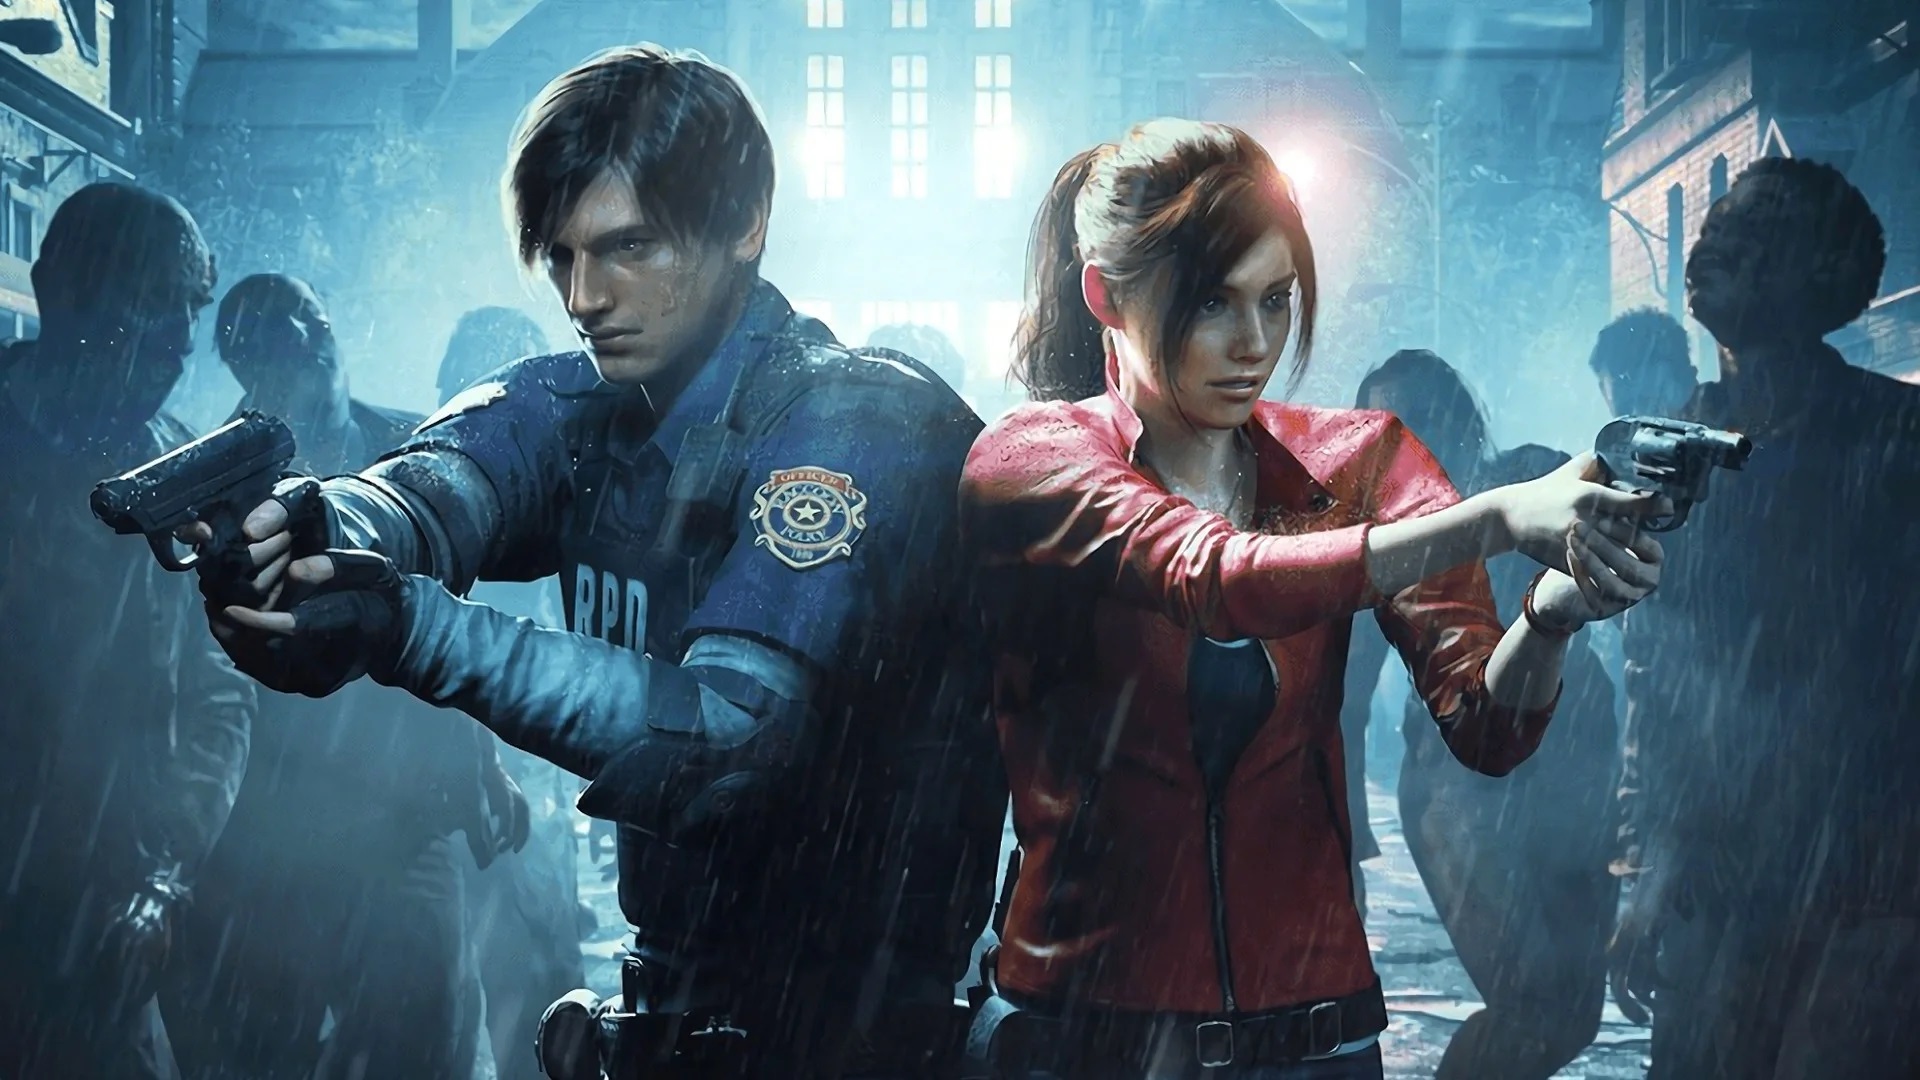 Resident Evil 2022 Season 1 Download and Watch Online